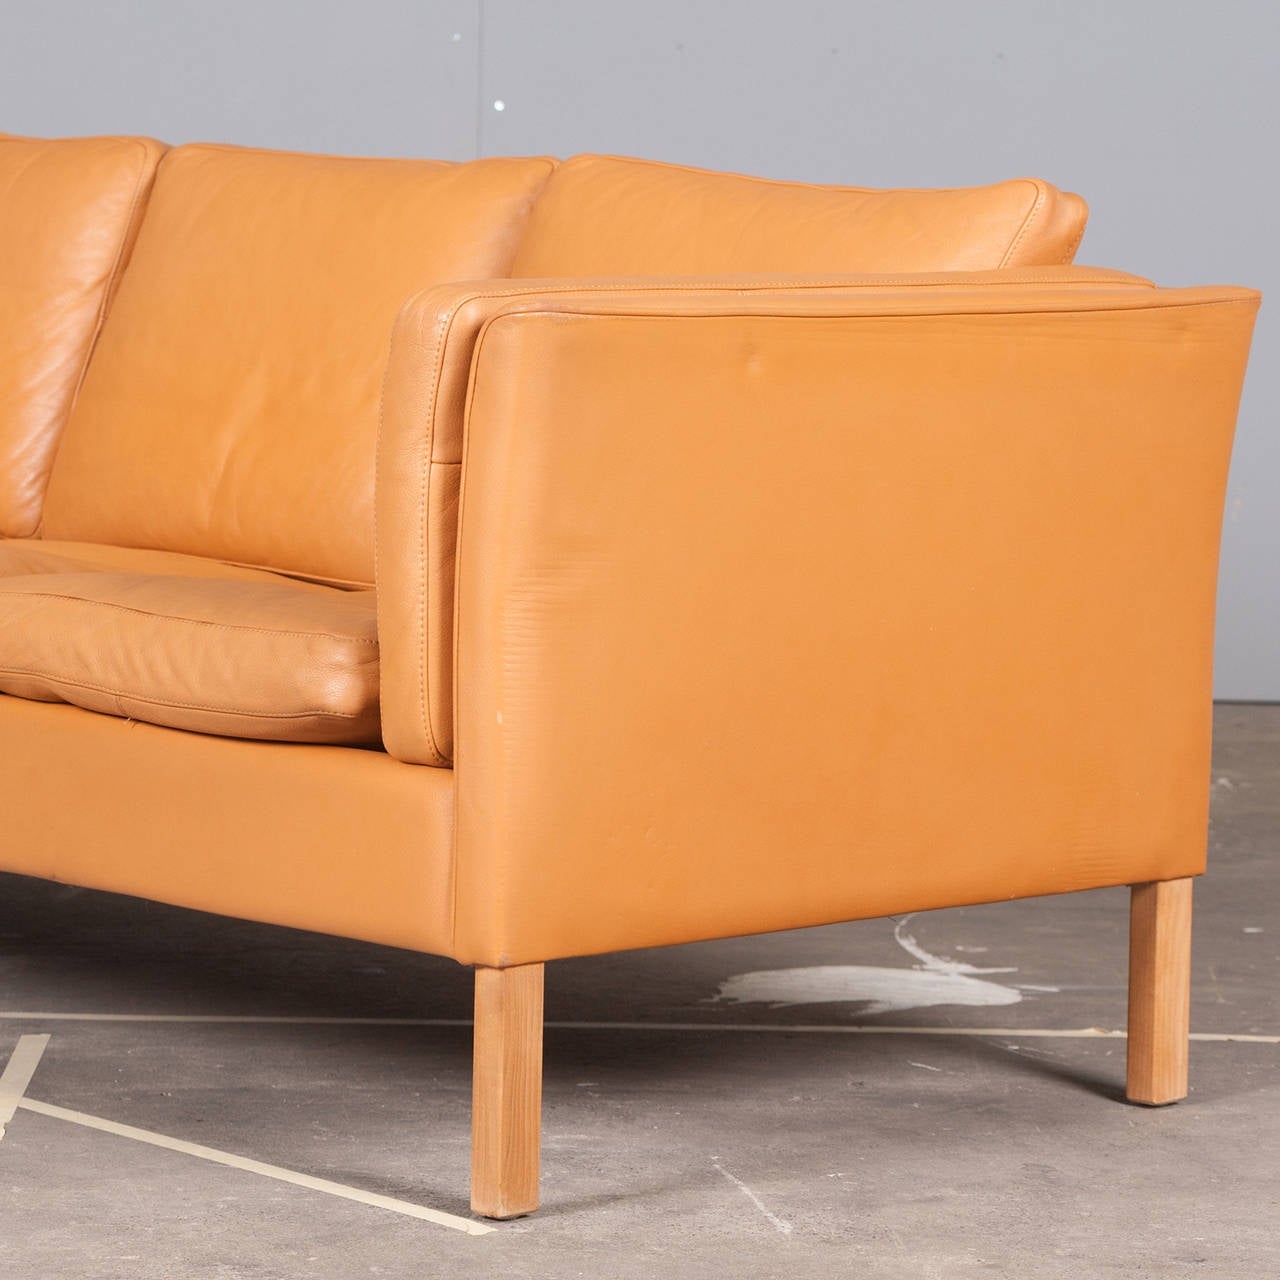 Danish Three-Seater Sofa in Honey Tan Leather, 1960s In Excellent Condition For Sale In Melbourne, Victoria